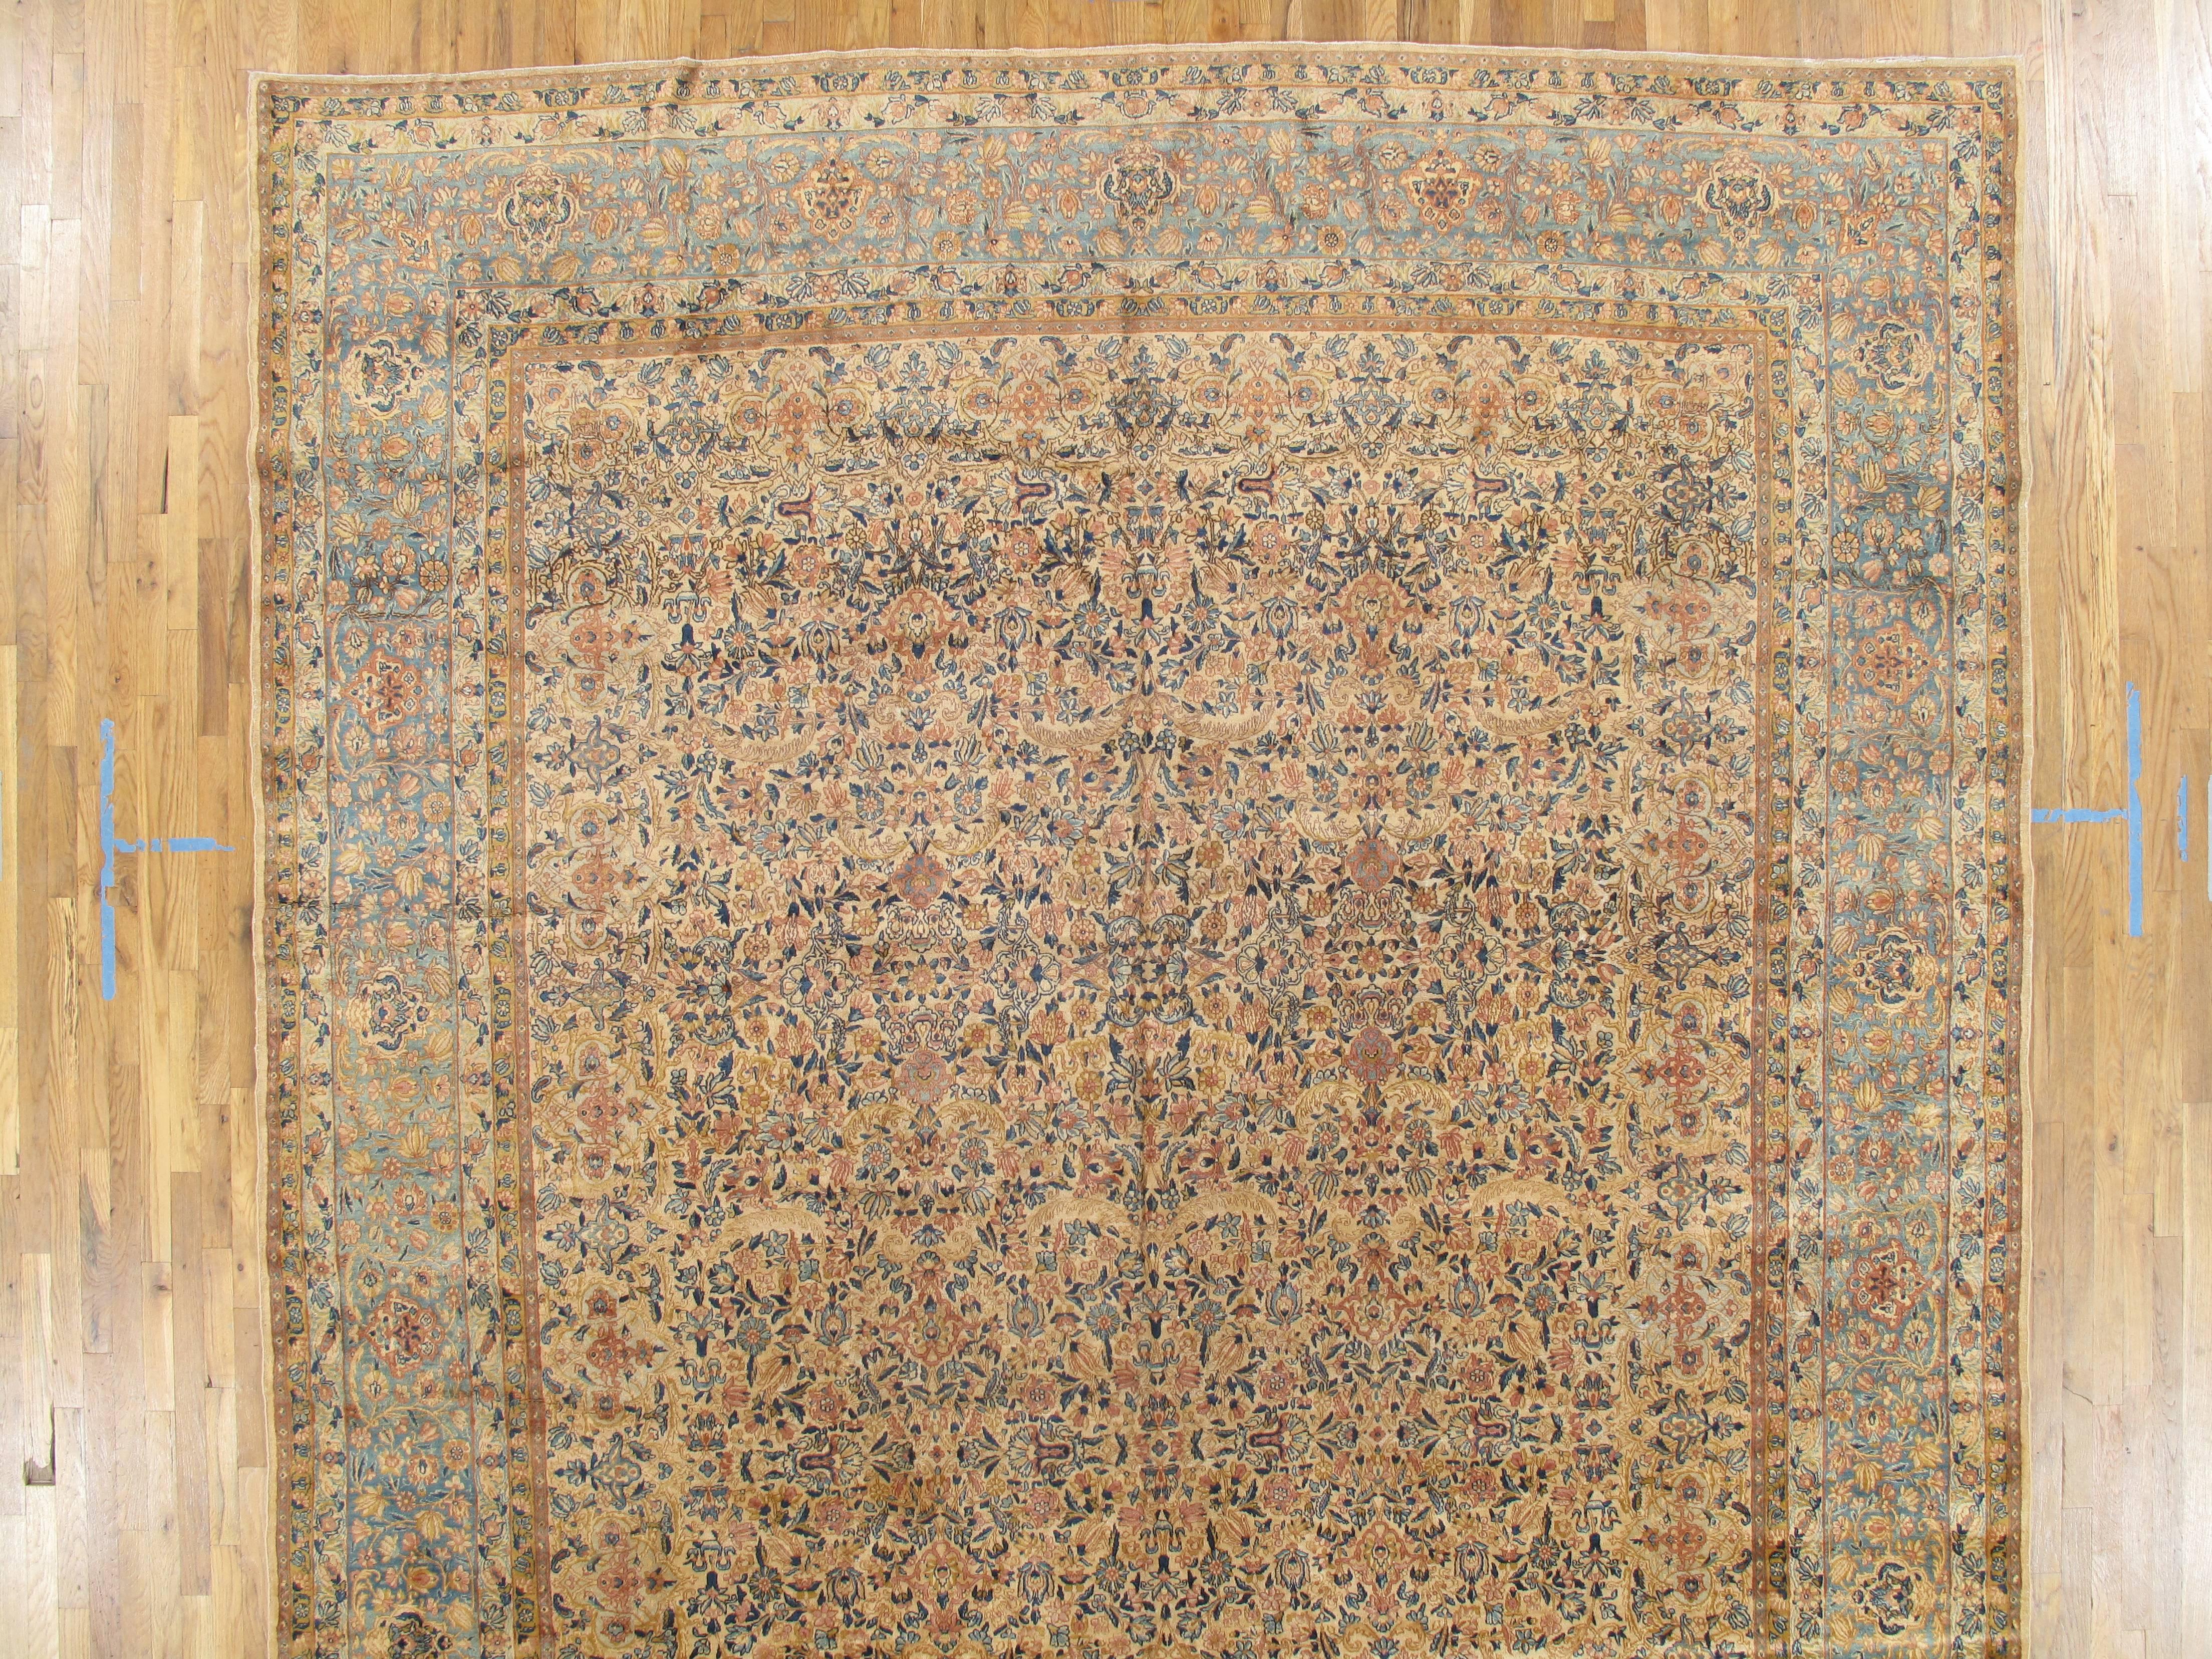 Antique Kerman Carpet, Handmade Persian Rug Wool Carpet, Blue, Beige and Peach In Good Condition For Sale In Port Washington, NY